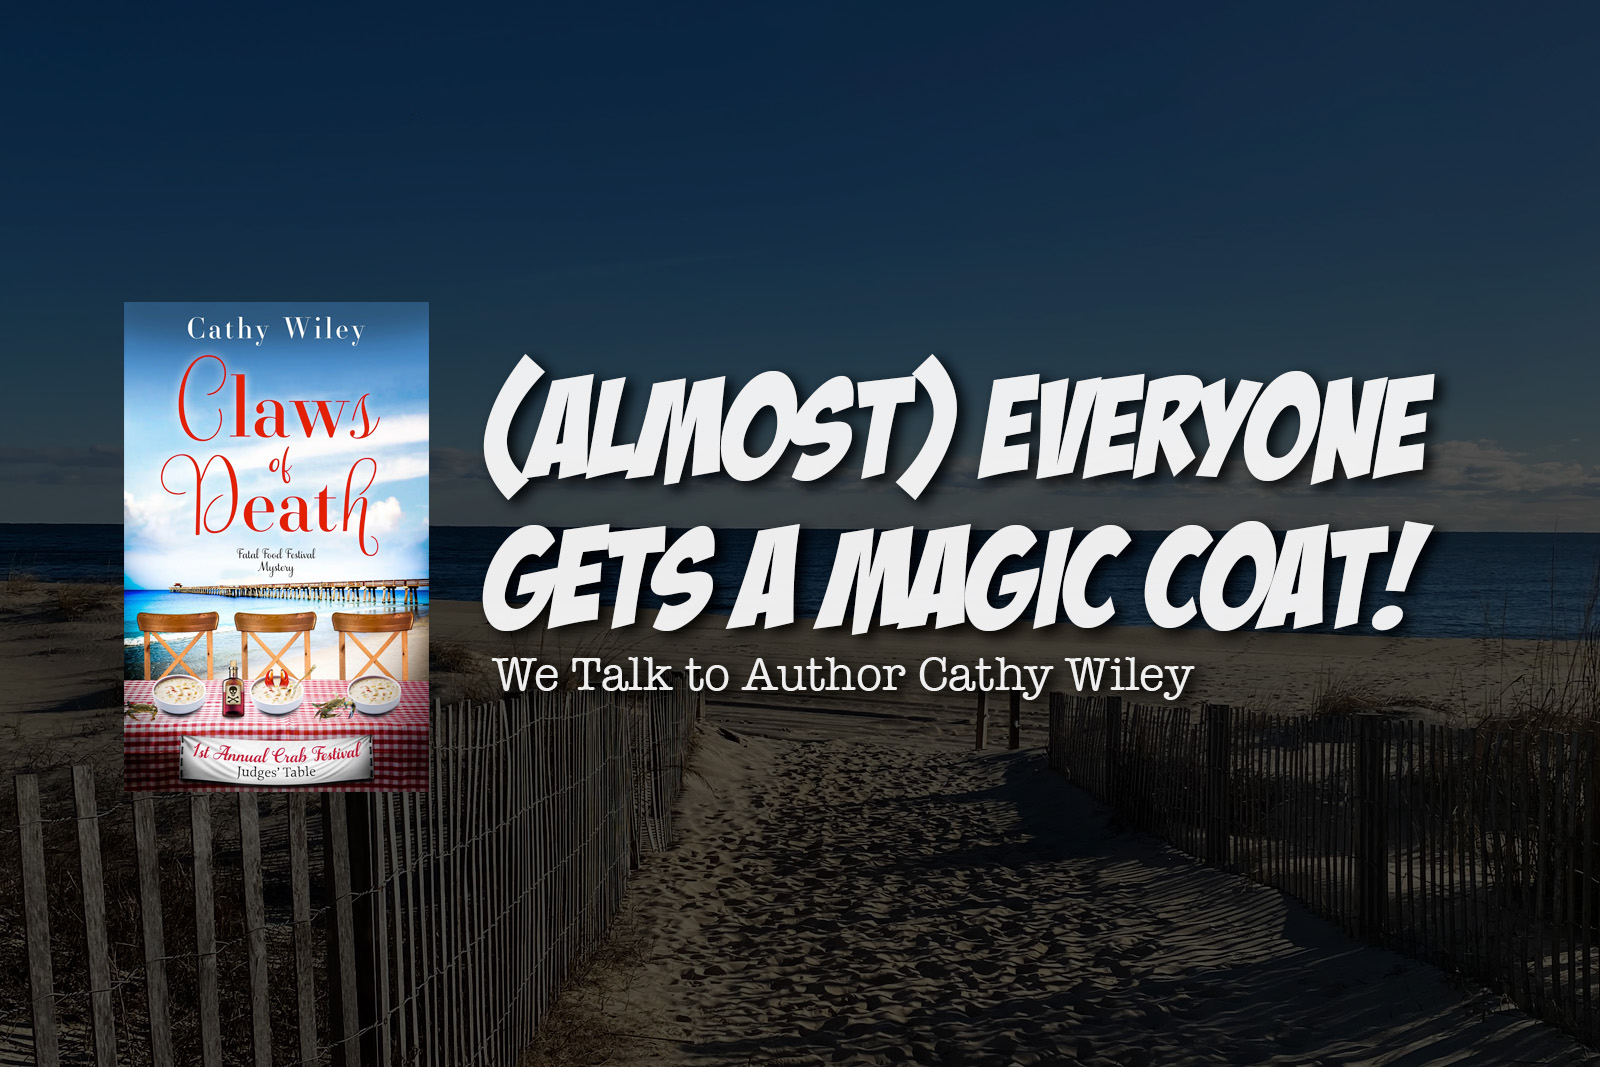 (Almost) Everyone Gets a Magic Coat! We Talk with Author Cathy Wiley!